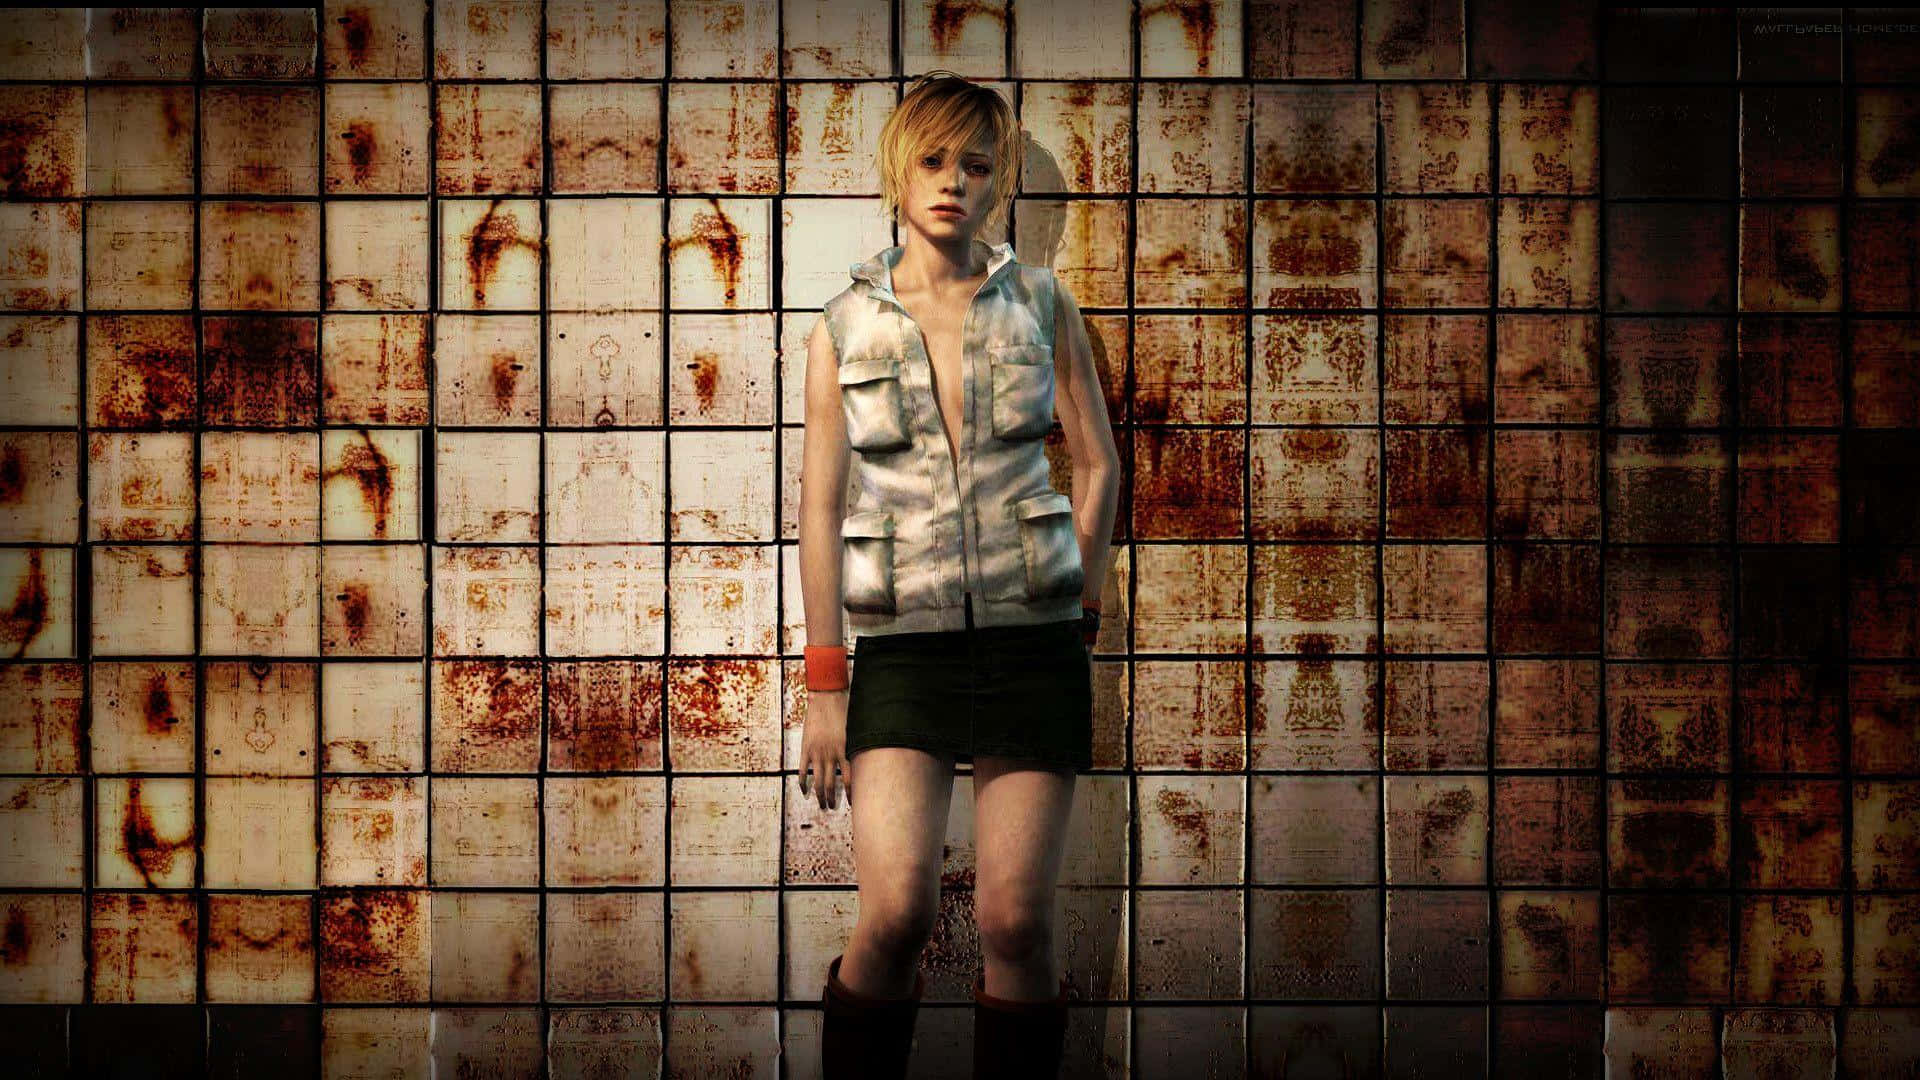 Visit Silent Hill For A Spooky And Disturbing Adventure